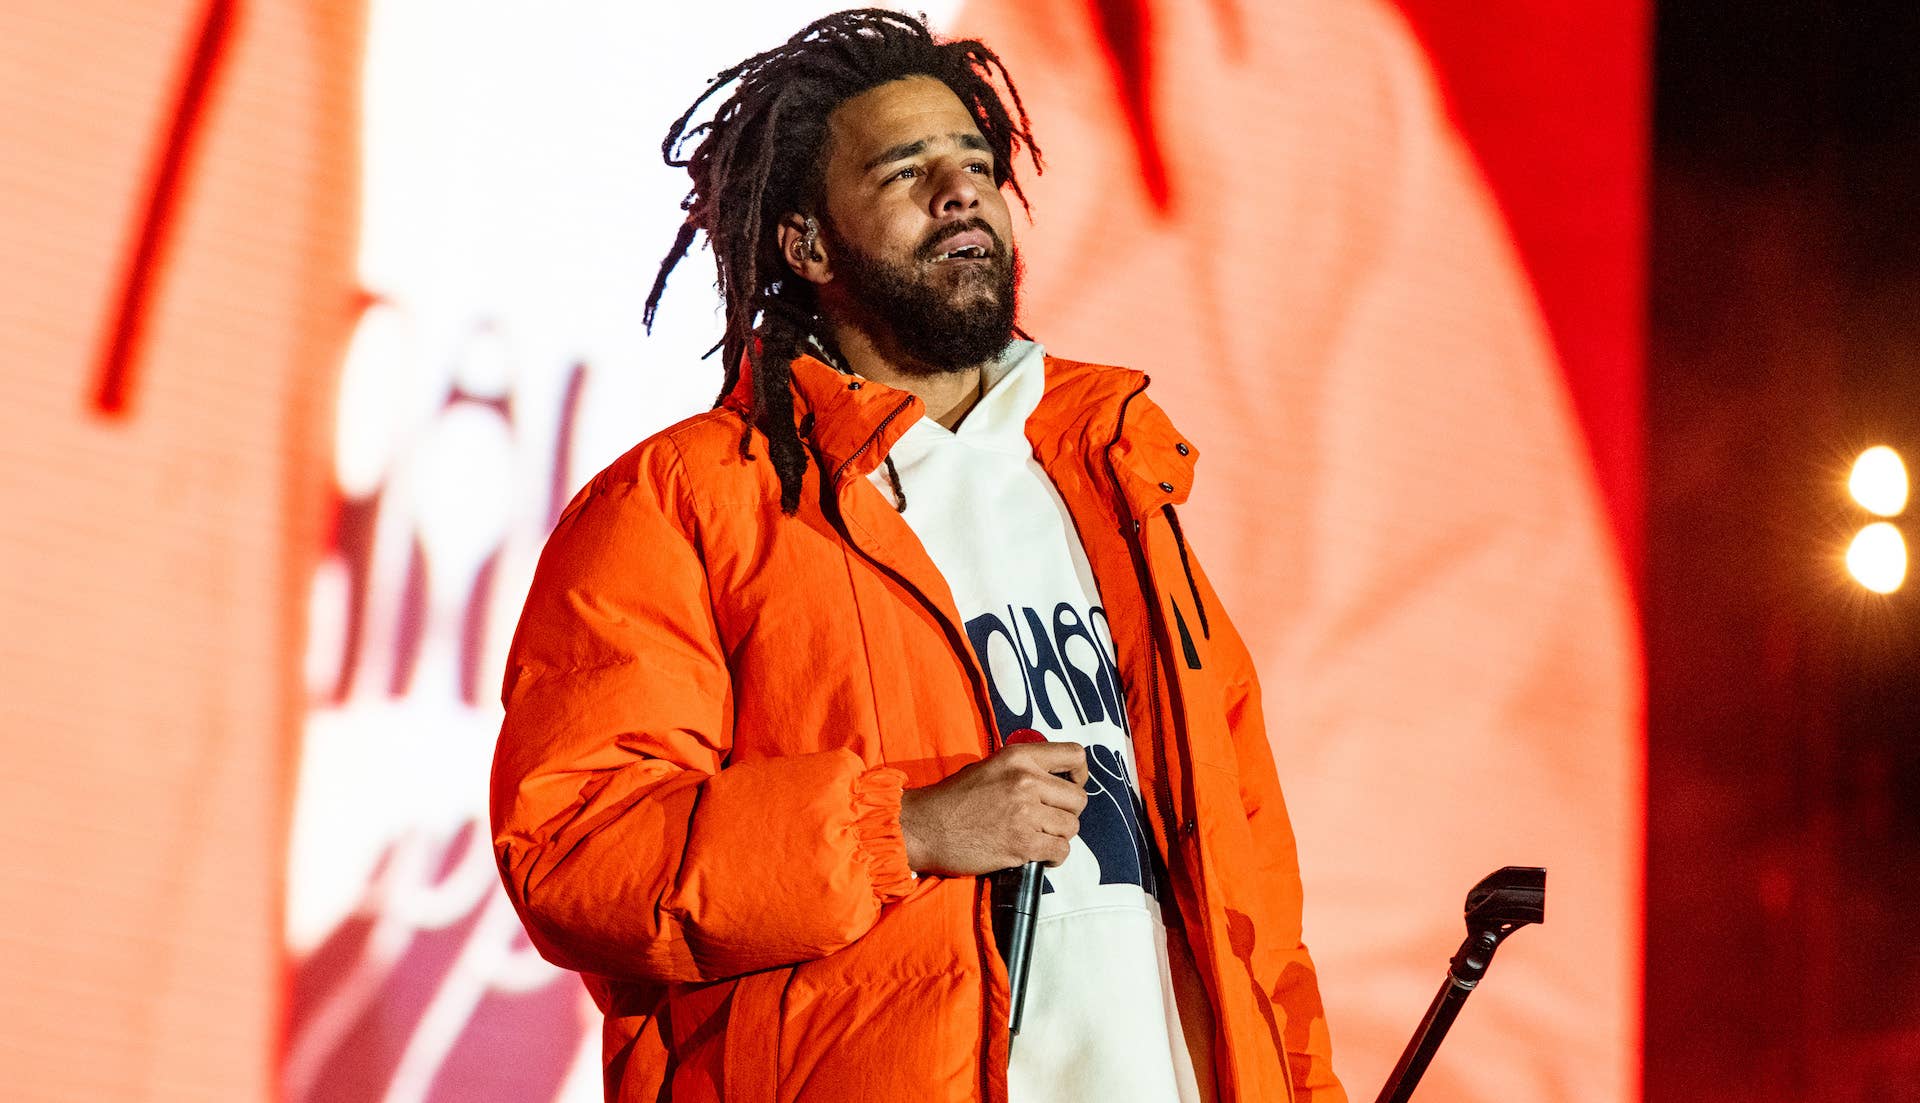 J. Cole performs at 2021 Rolling Loud in Los Angeles